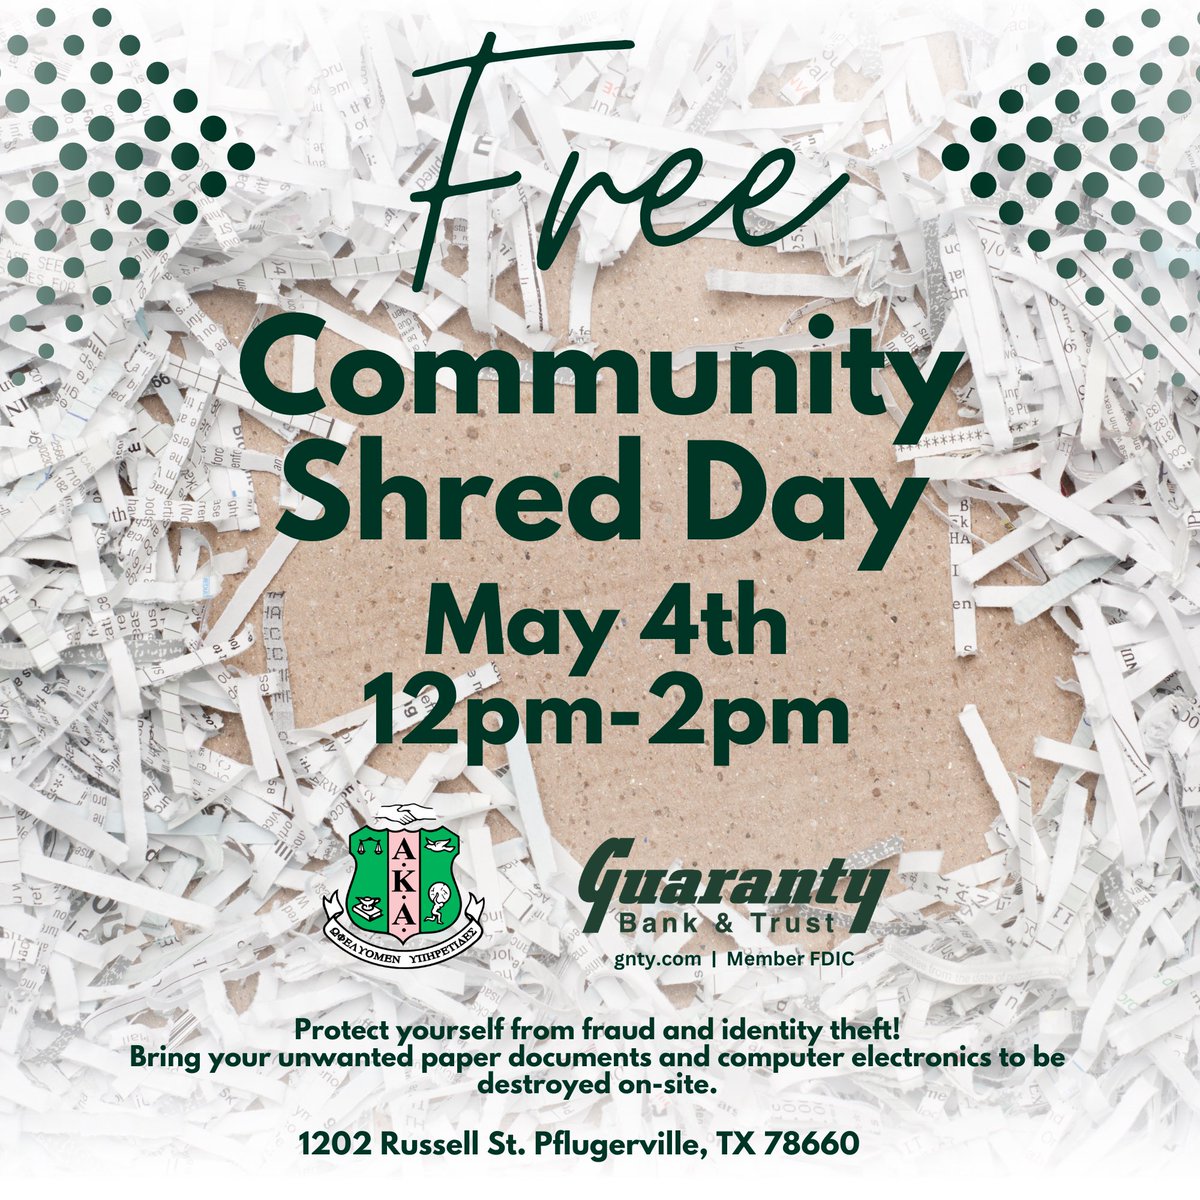 📢 Join us for a FREE Shred Day event! 📄💻 Protect yourself and your loved ones from potential risks. Let's shred away worries together! 🛡️🔐 #CommunityEvent #IdentityProtection #FraudPrevention 🗂️🔥